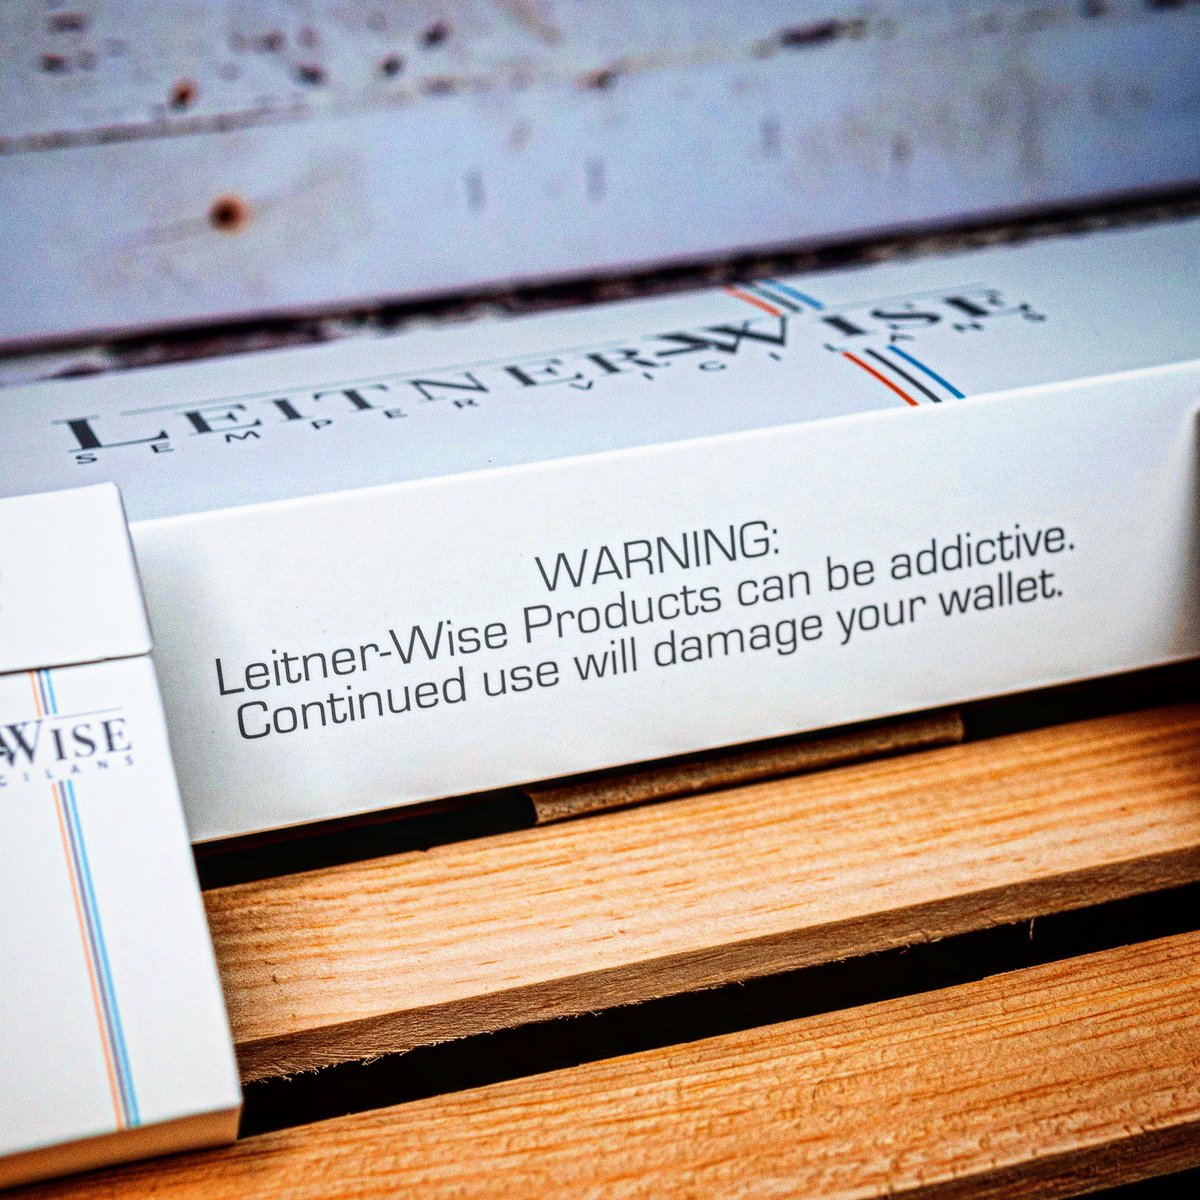 The mandatory health warning that accompanies all Leitner-Wise products. leitner-wise.com